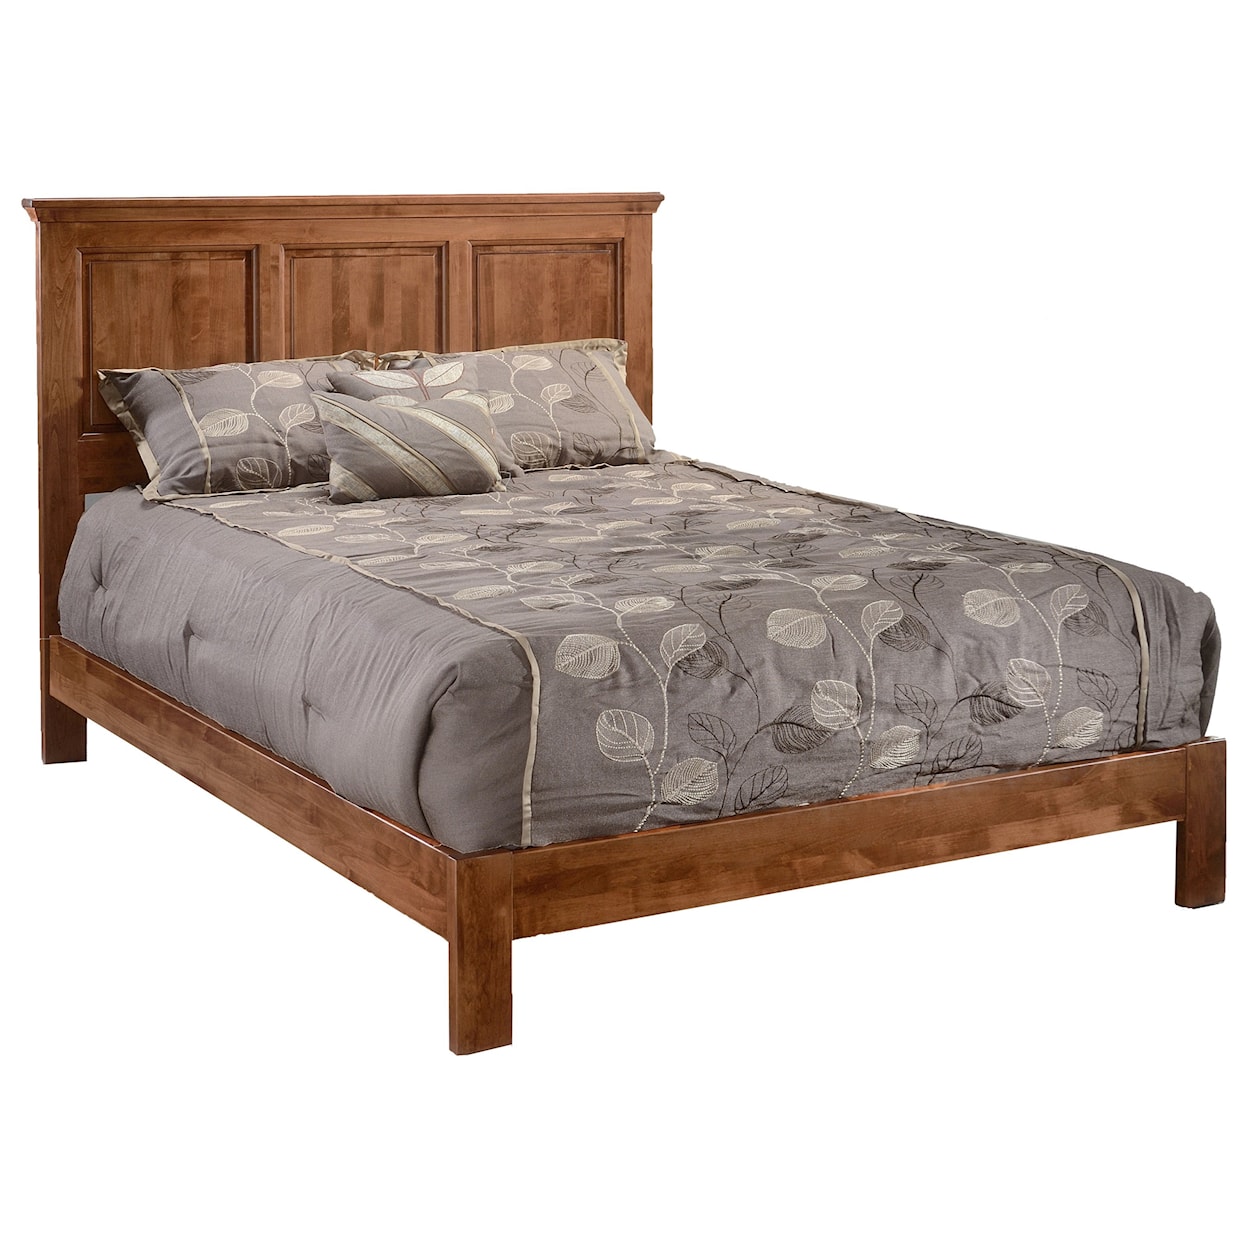 Archbold Furniture Heritage Queen Raised Panel Bed